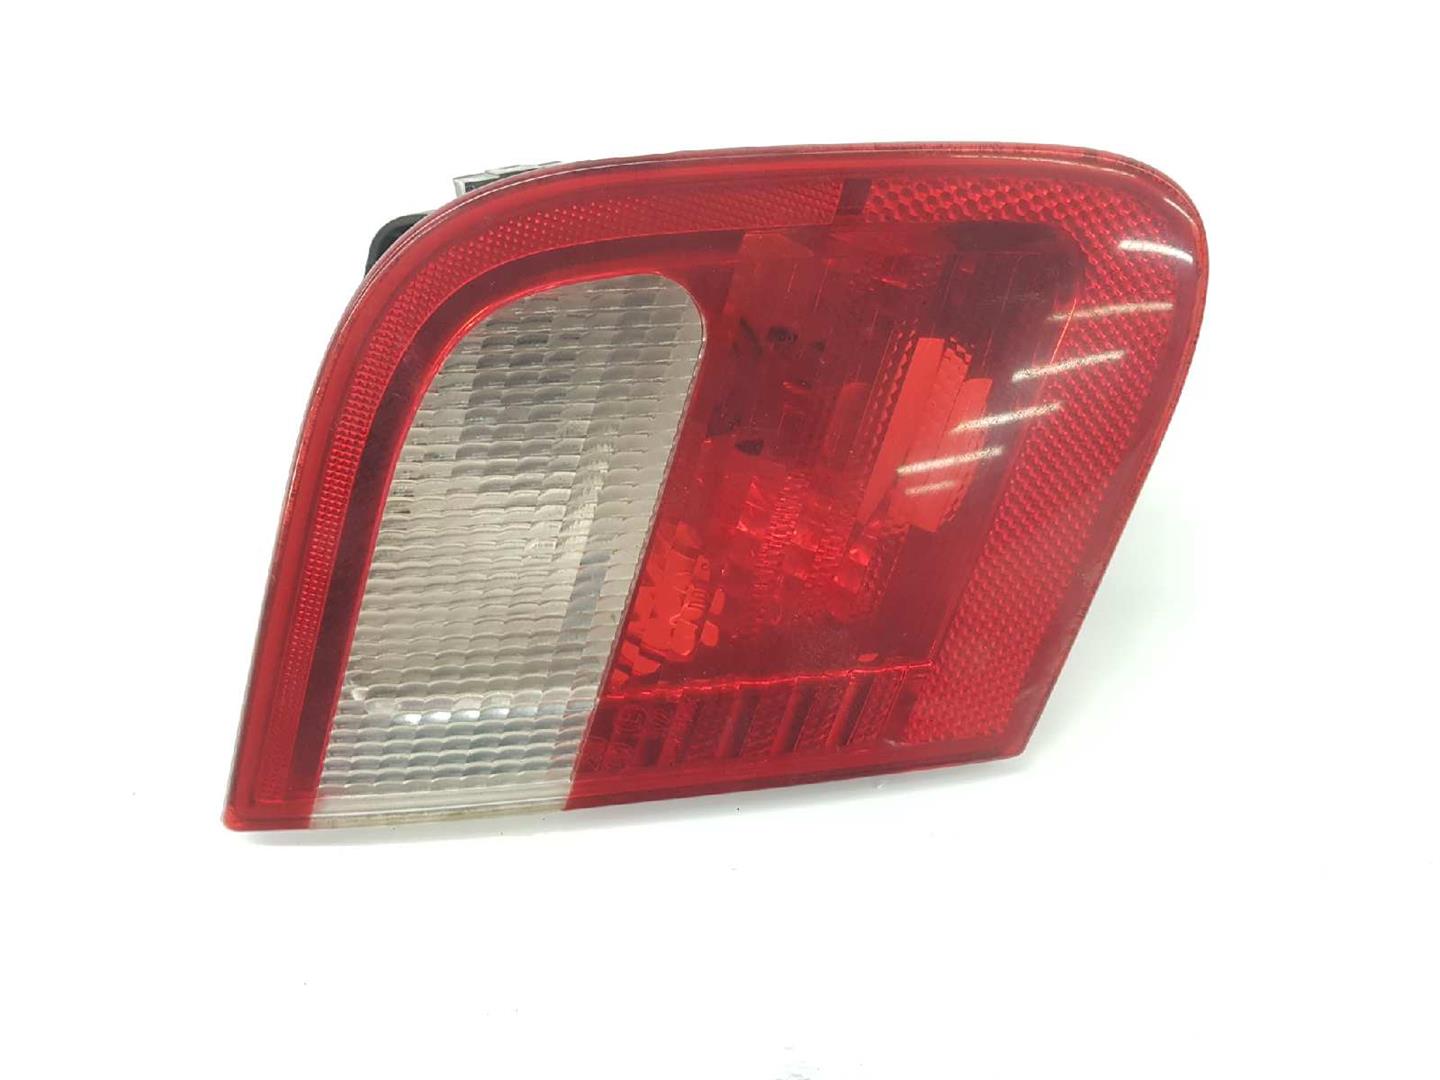 BMW 3 Series E46 (1997-2006) Left Side Tailgate Taillight 63218364923, 8364923 19935693